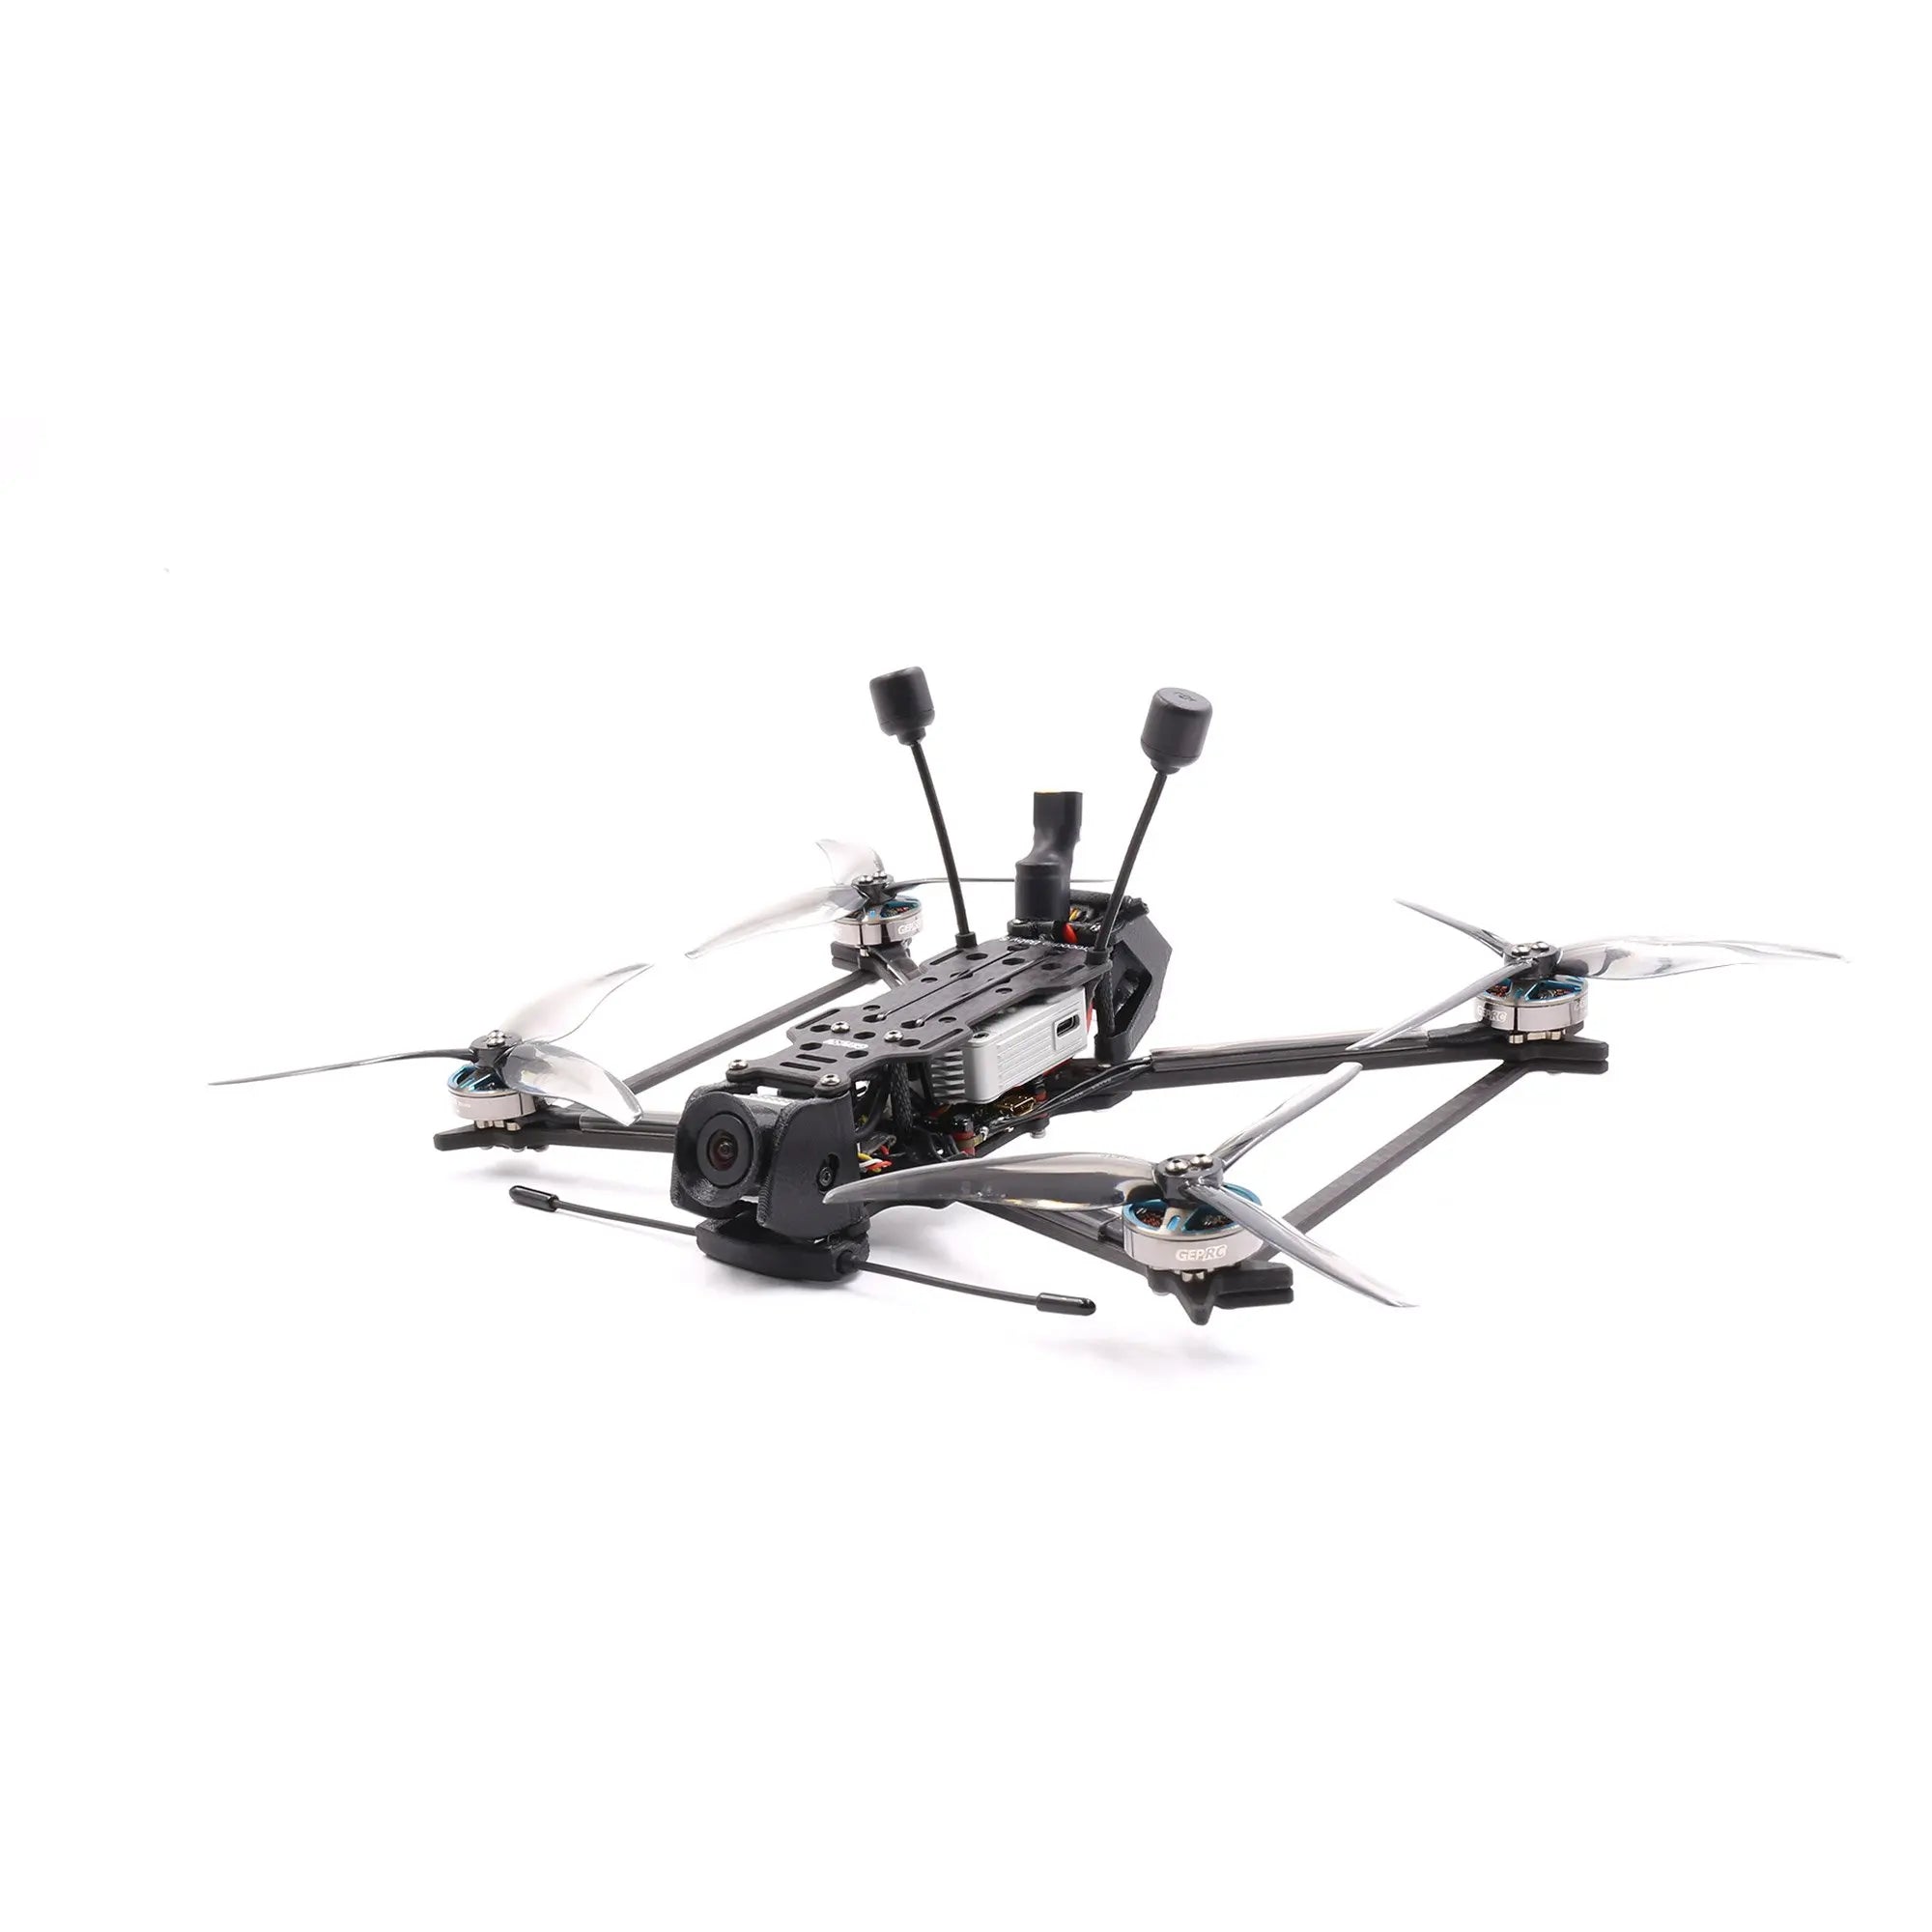 GEPRC Crocodile5 Baby FPV Drone, Recording 1080p 60fps video in real time